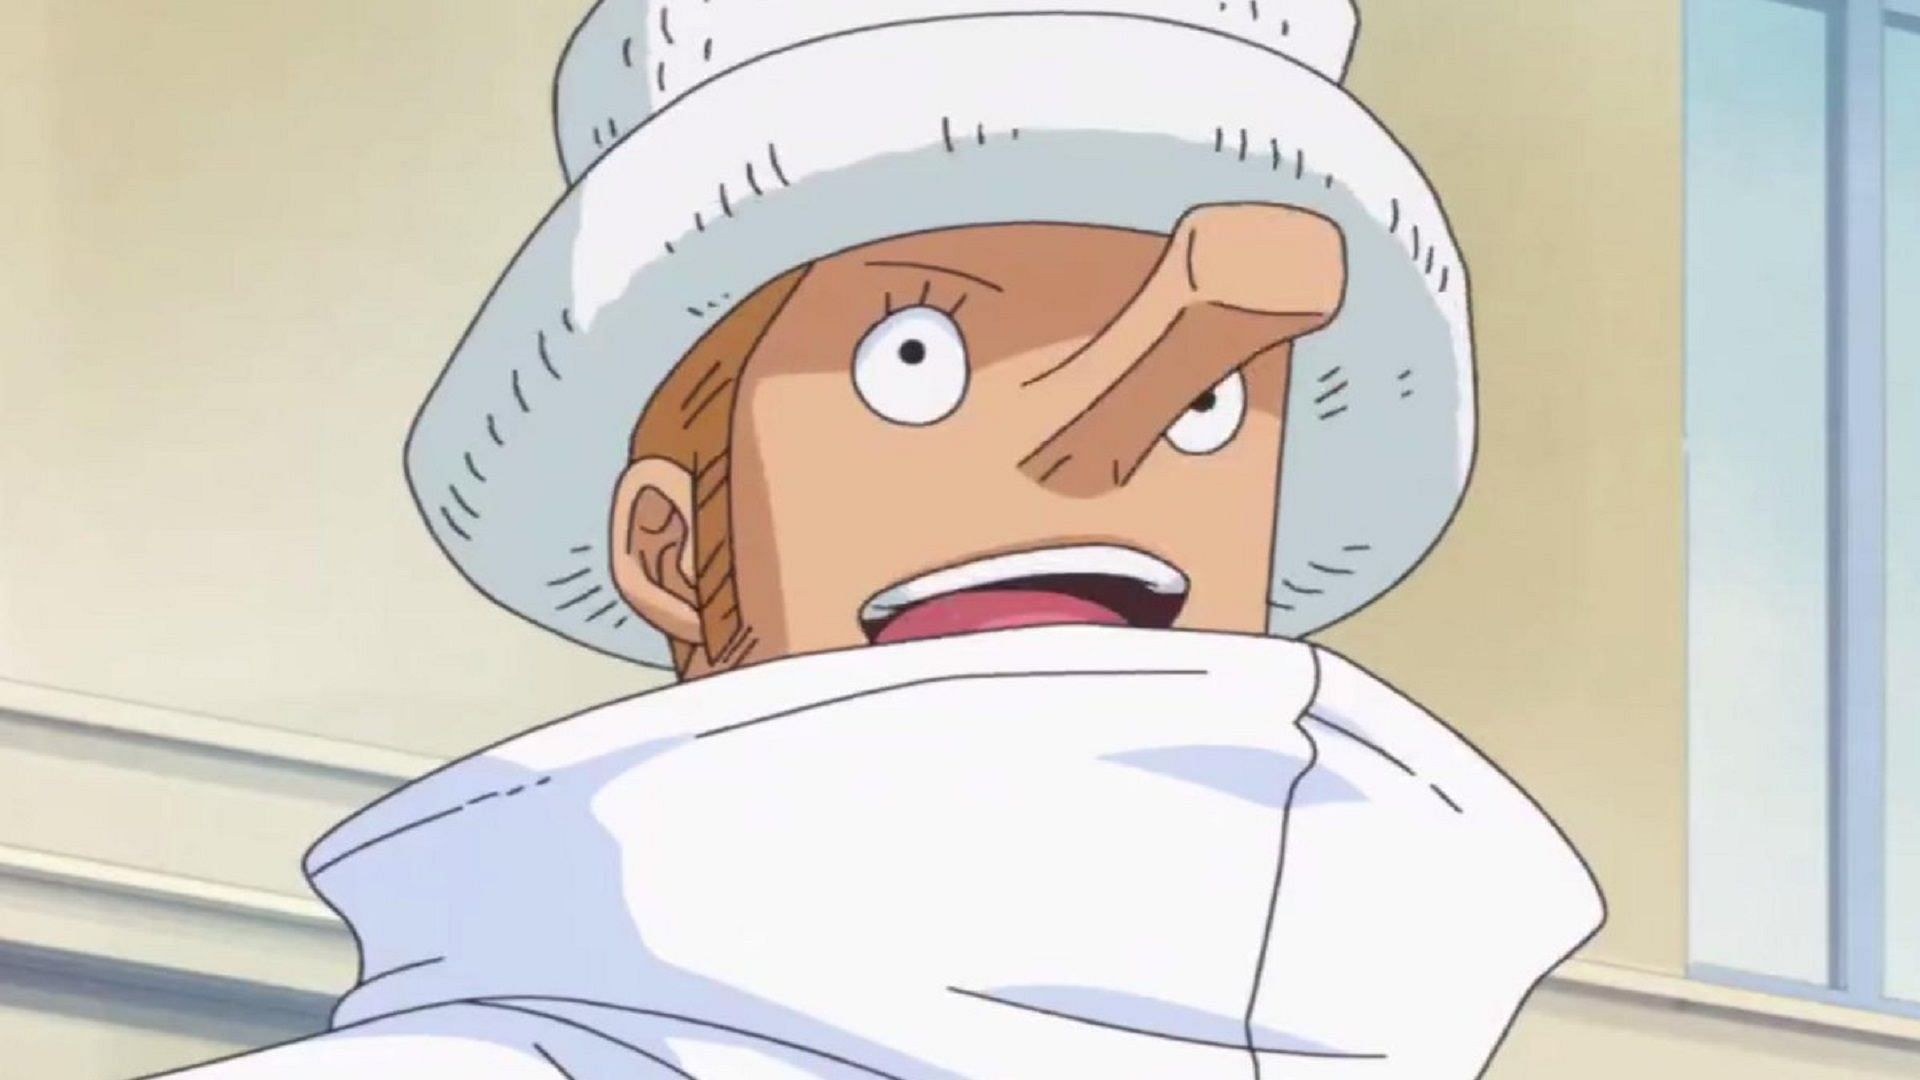 Kaku was the second strongest CP9 agent and now is an elite member of the CP0 (Image via Toei Animation, One Piece)